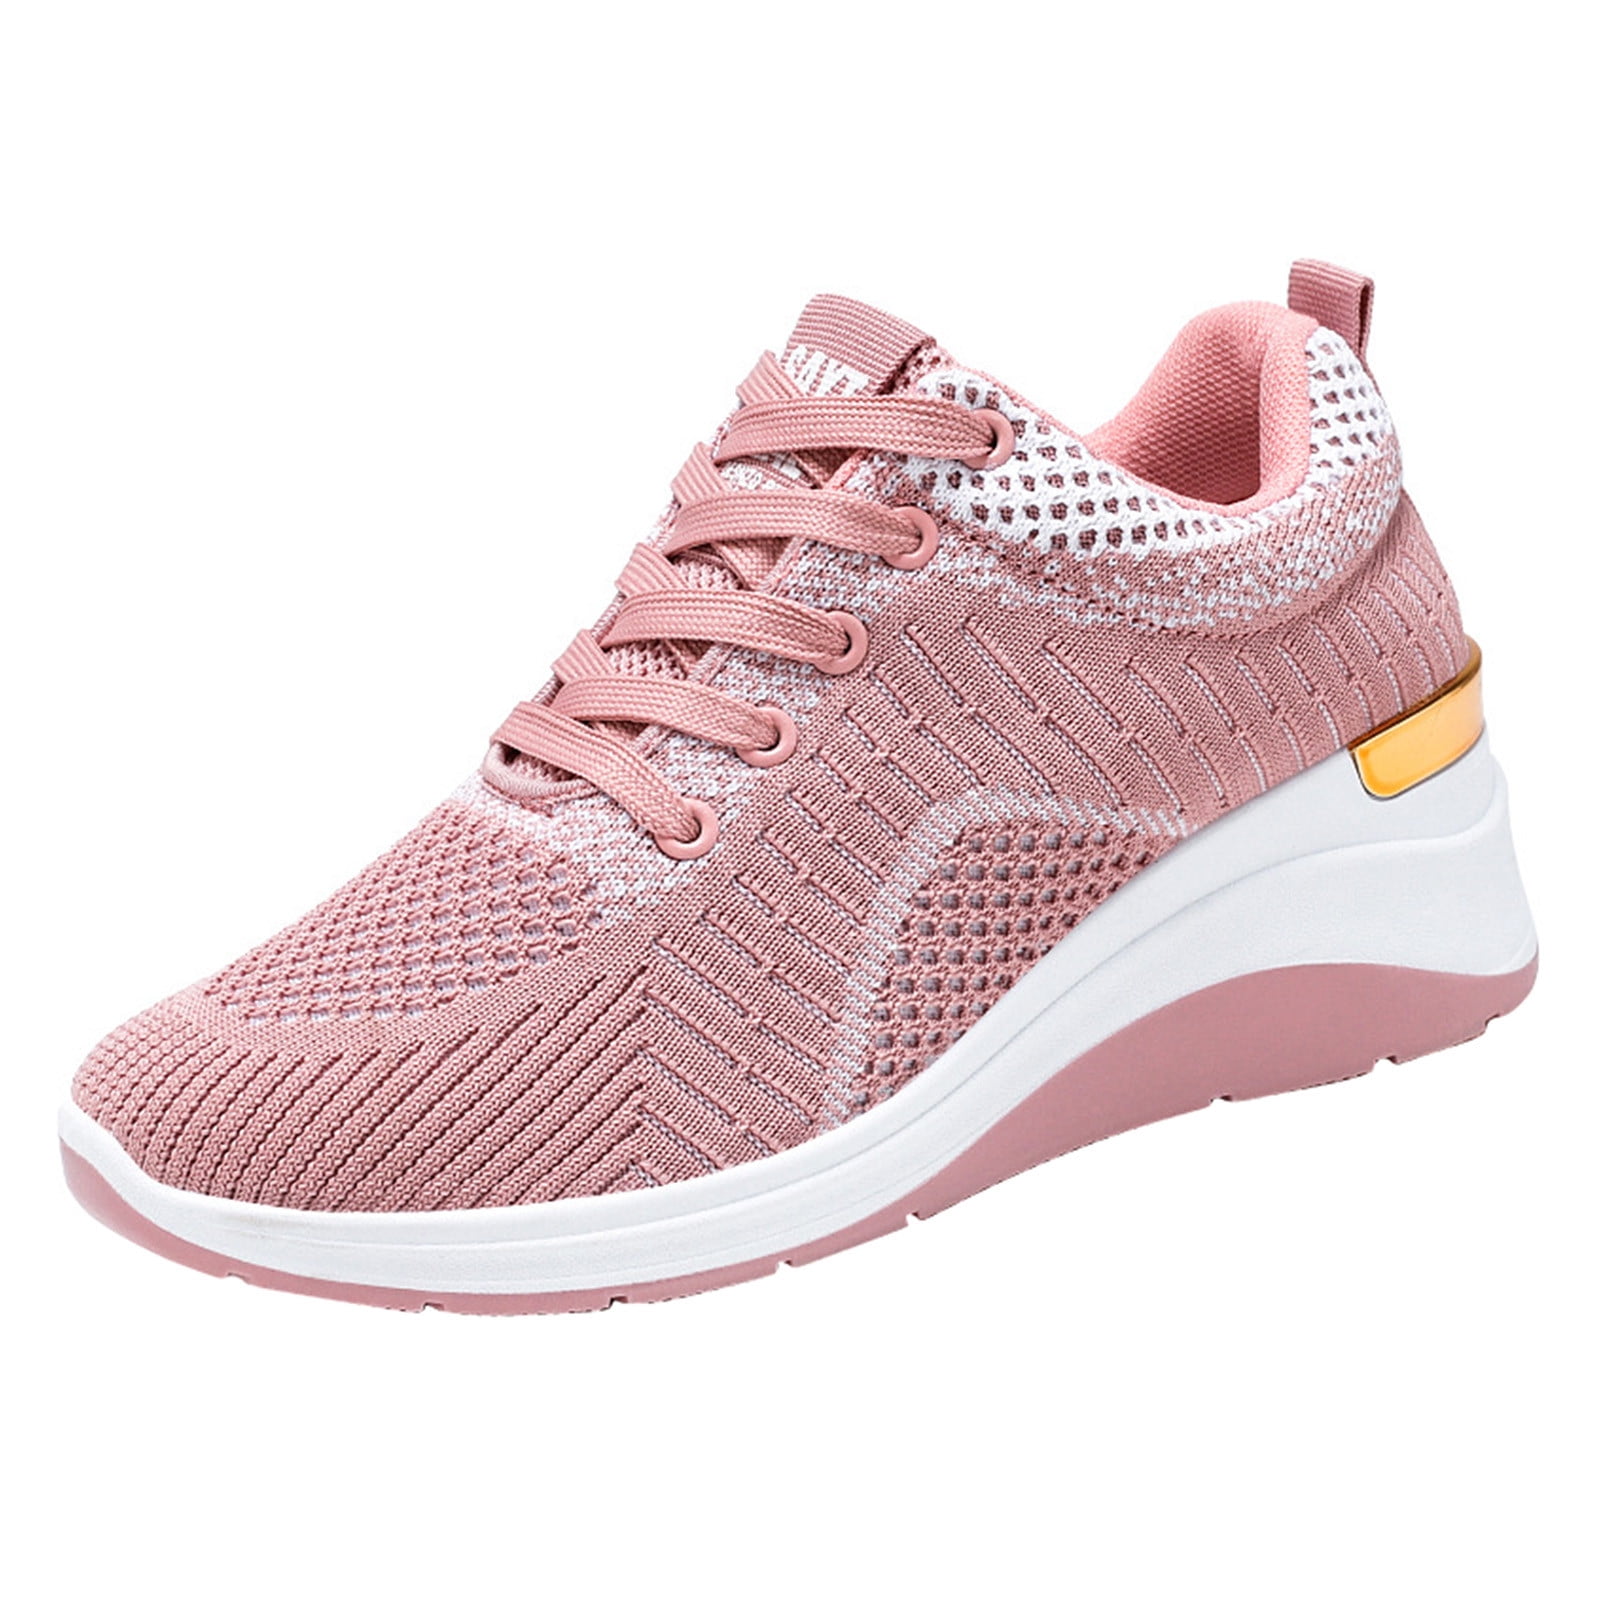 Extra Wide Women's Sneakers Mesh Fitness Wedge Casual Shoes Shoes Sport ...